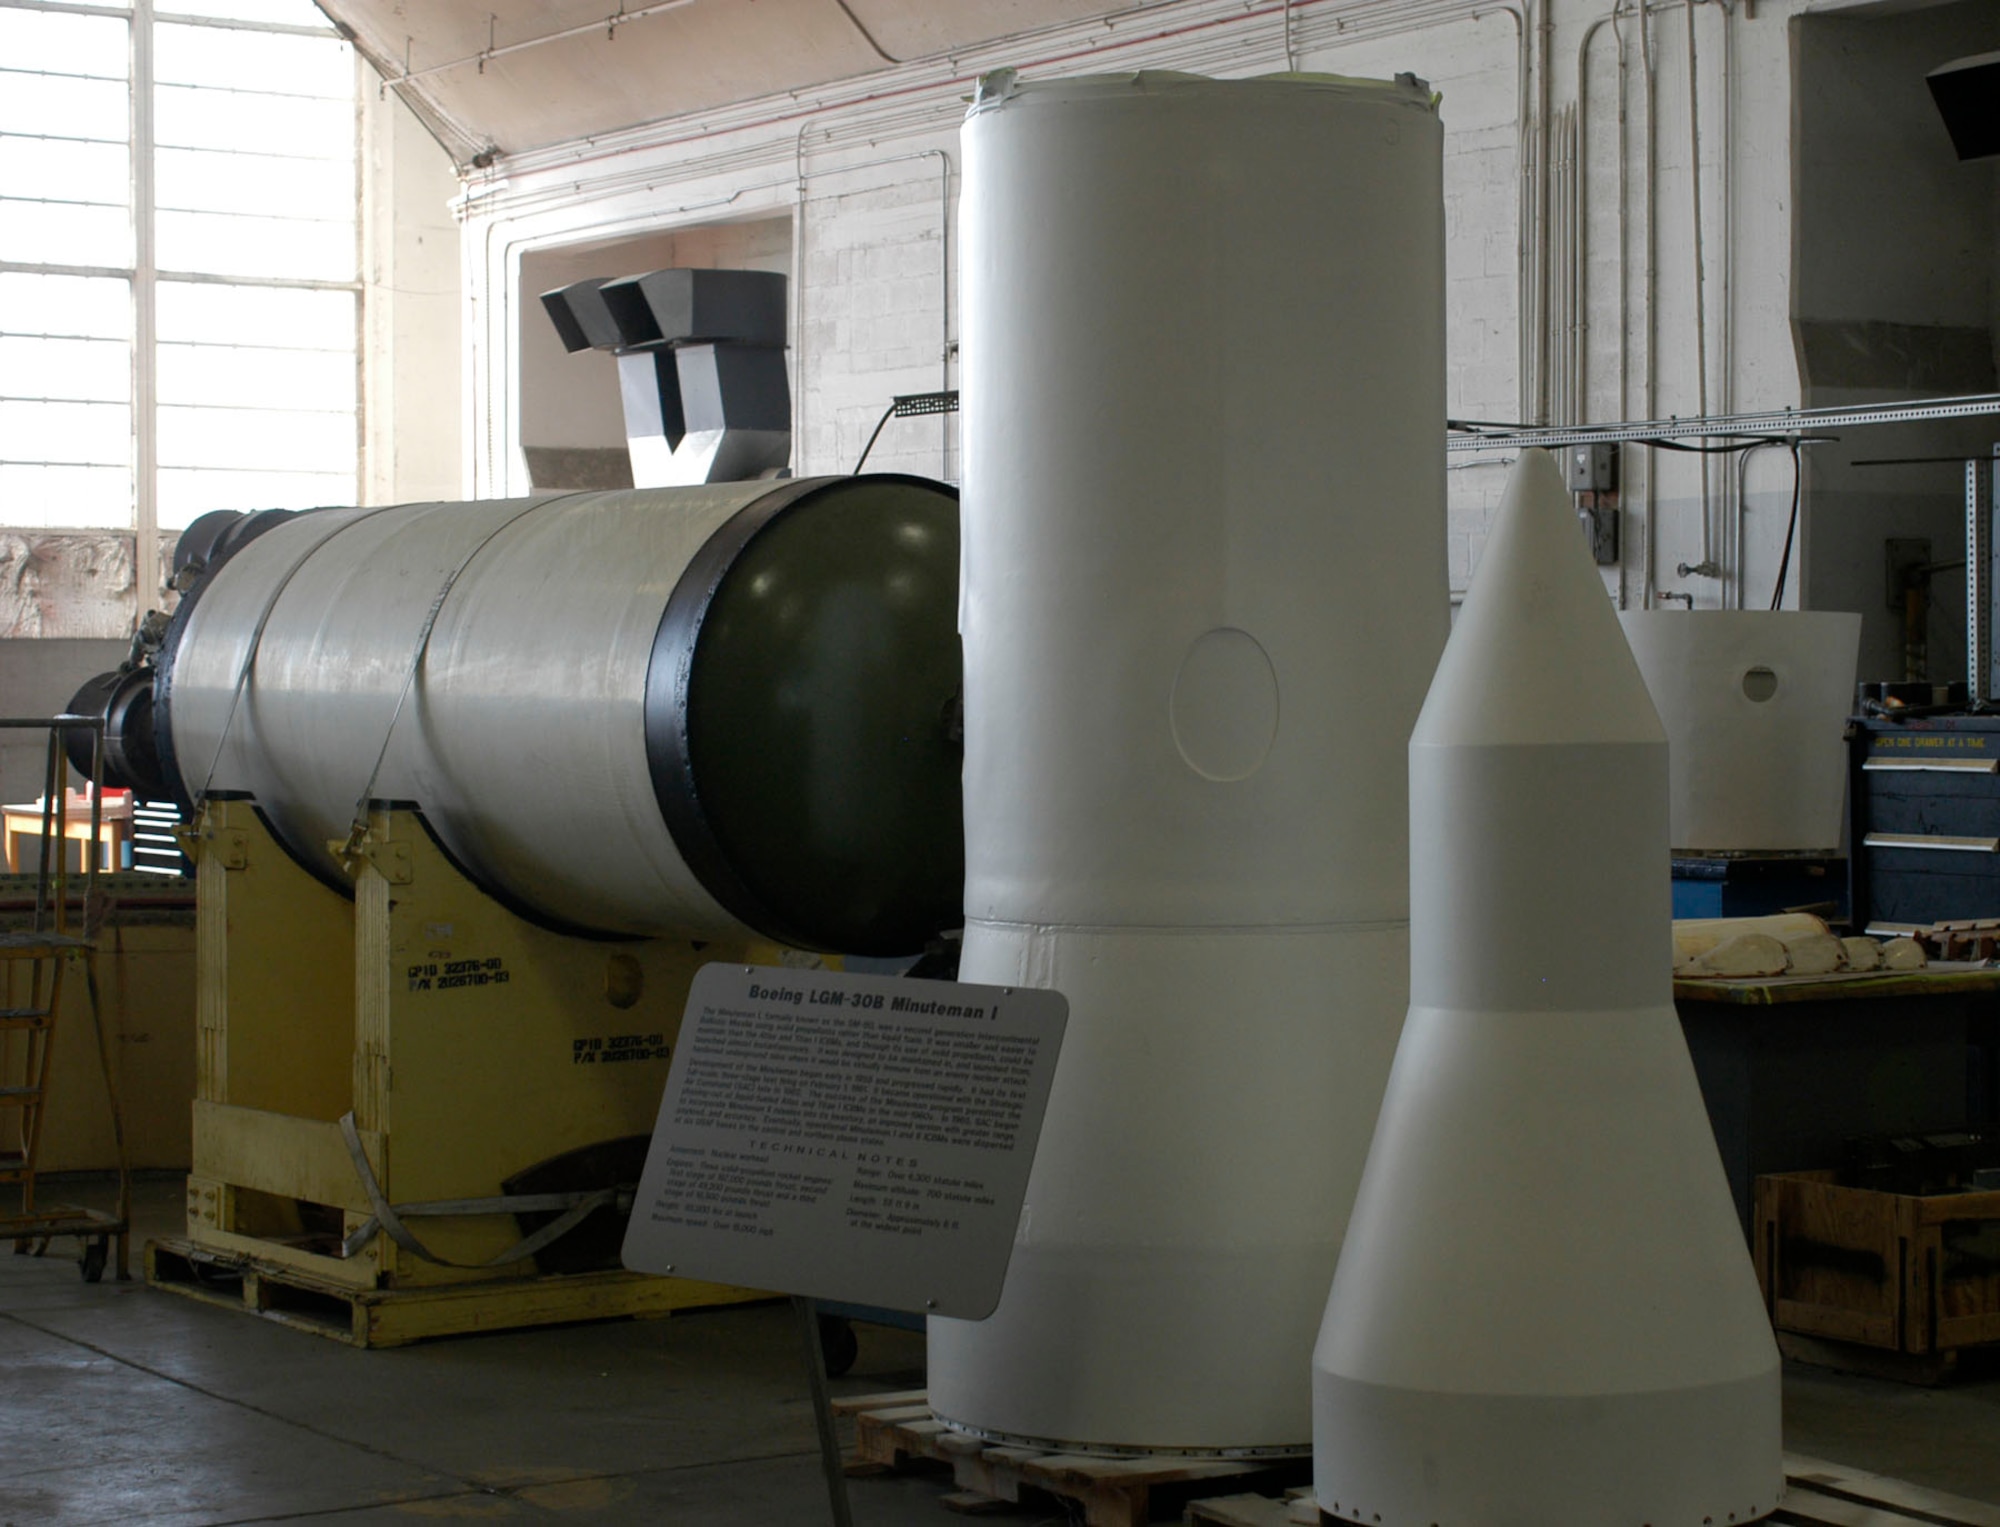 DAYTON Ohio -- The Minuteman I missile in the restoration hangar at the National Museum of the U.S. Air Force. (U.S. Air Force Photo)